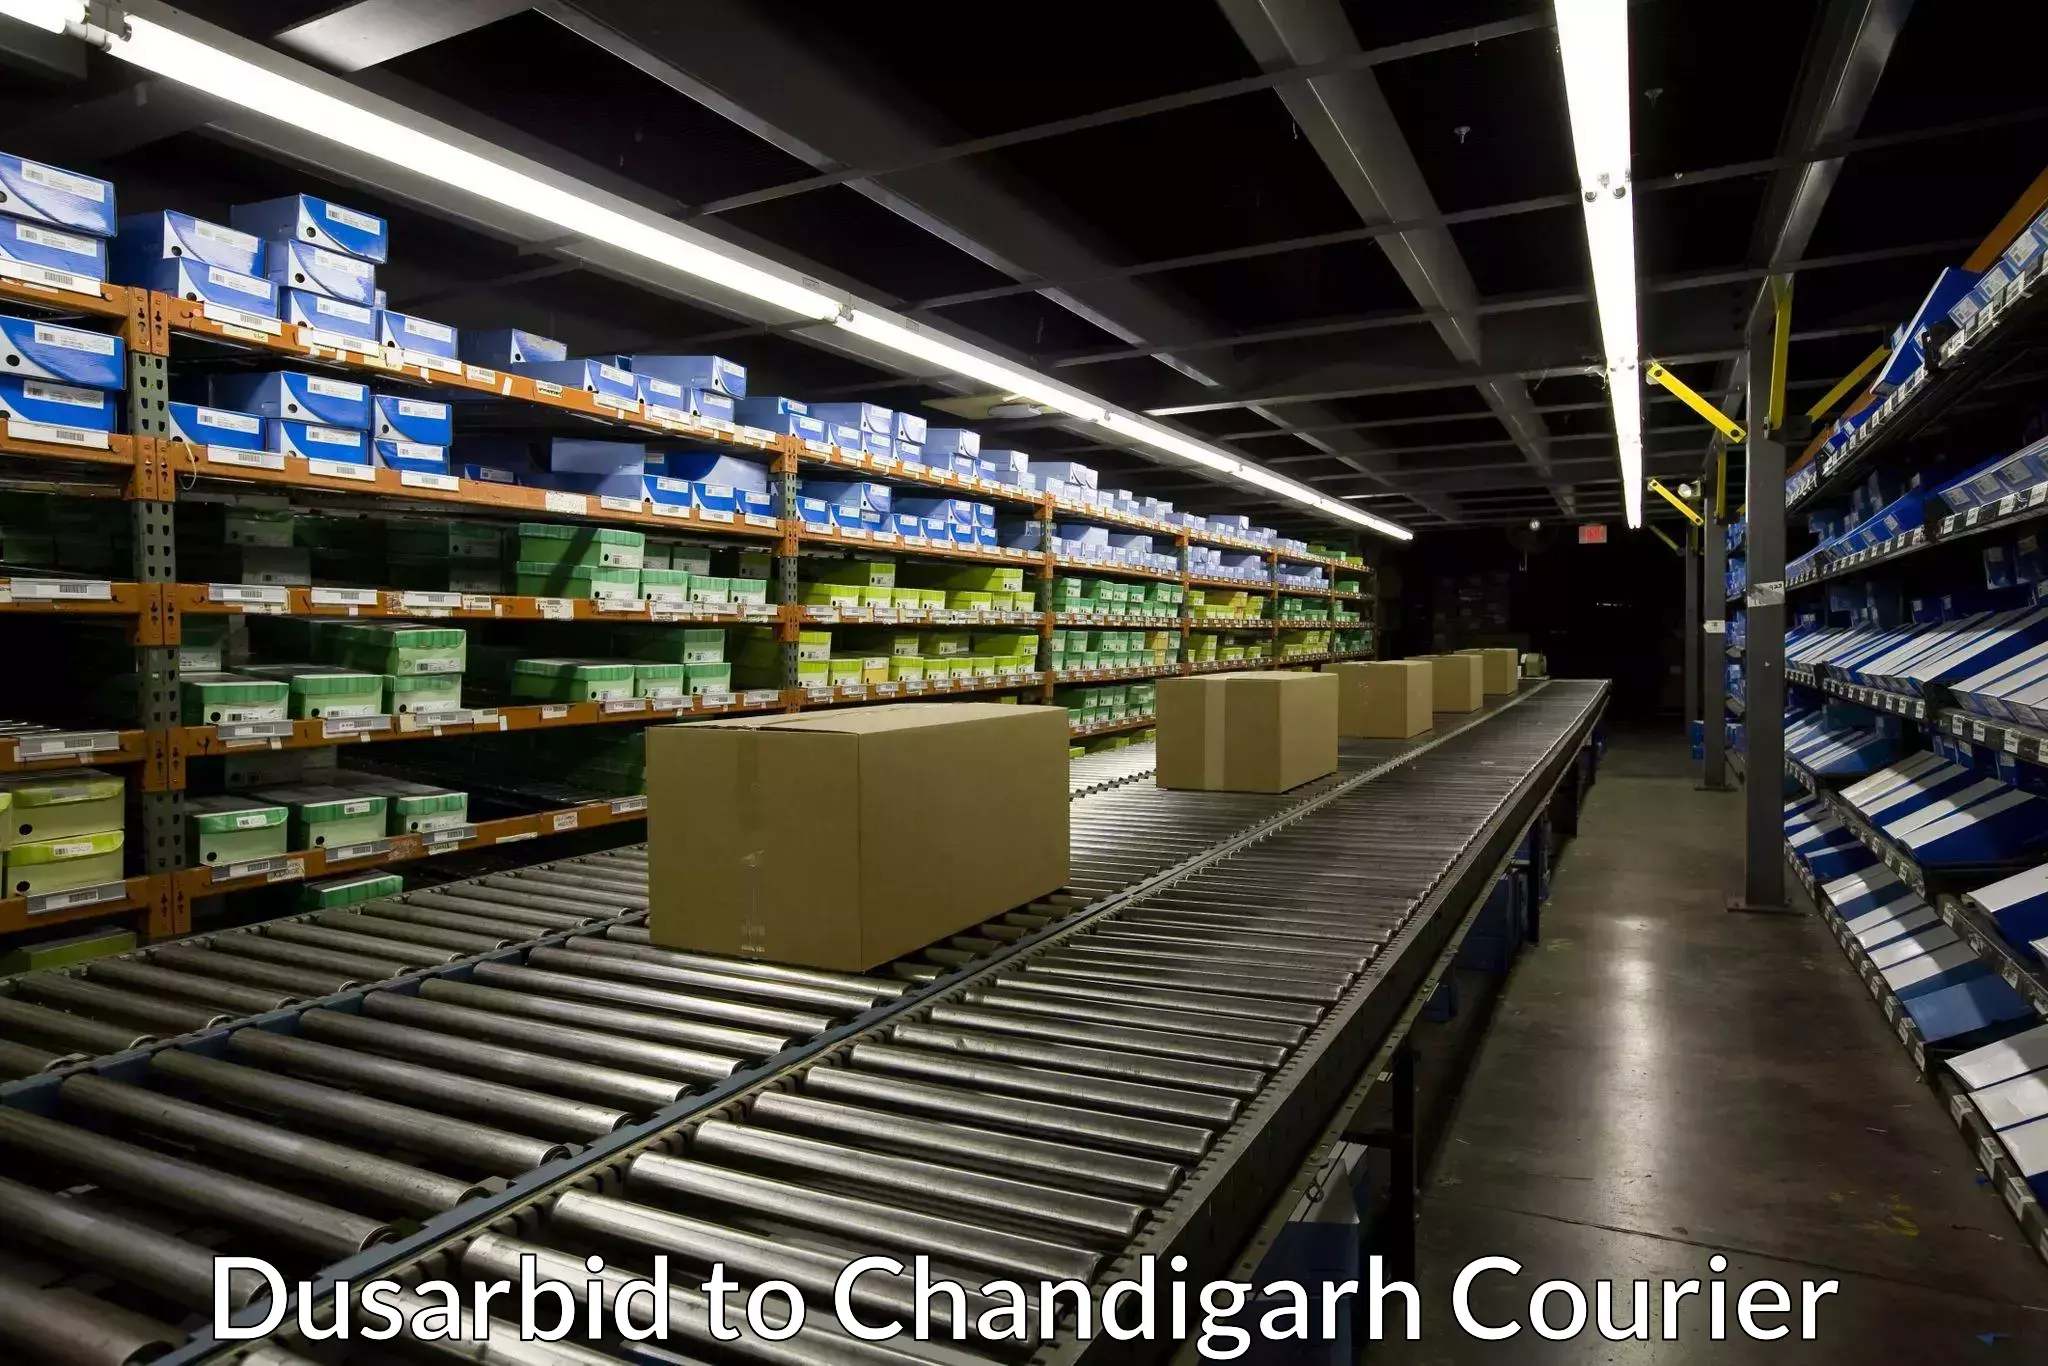 Seamless shipping experience Dusarbid to Chandigarh